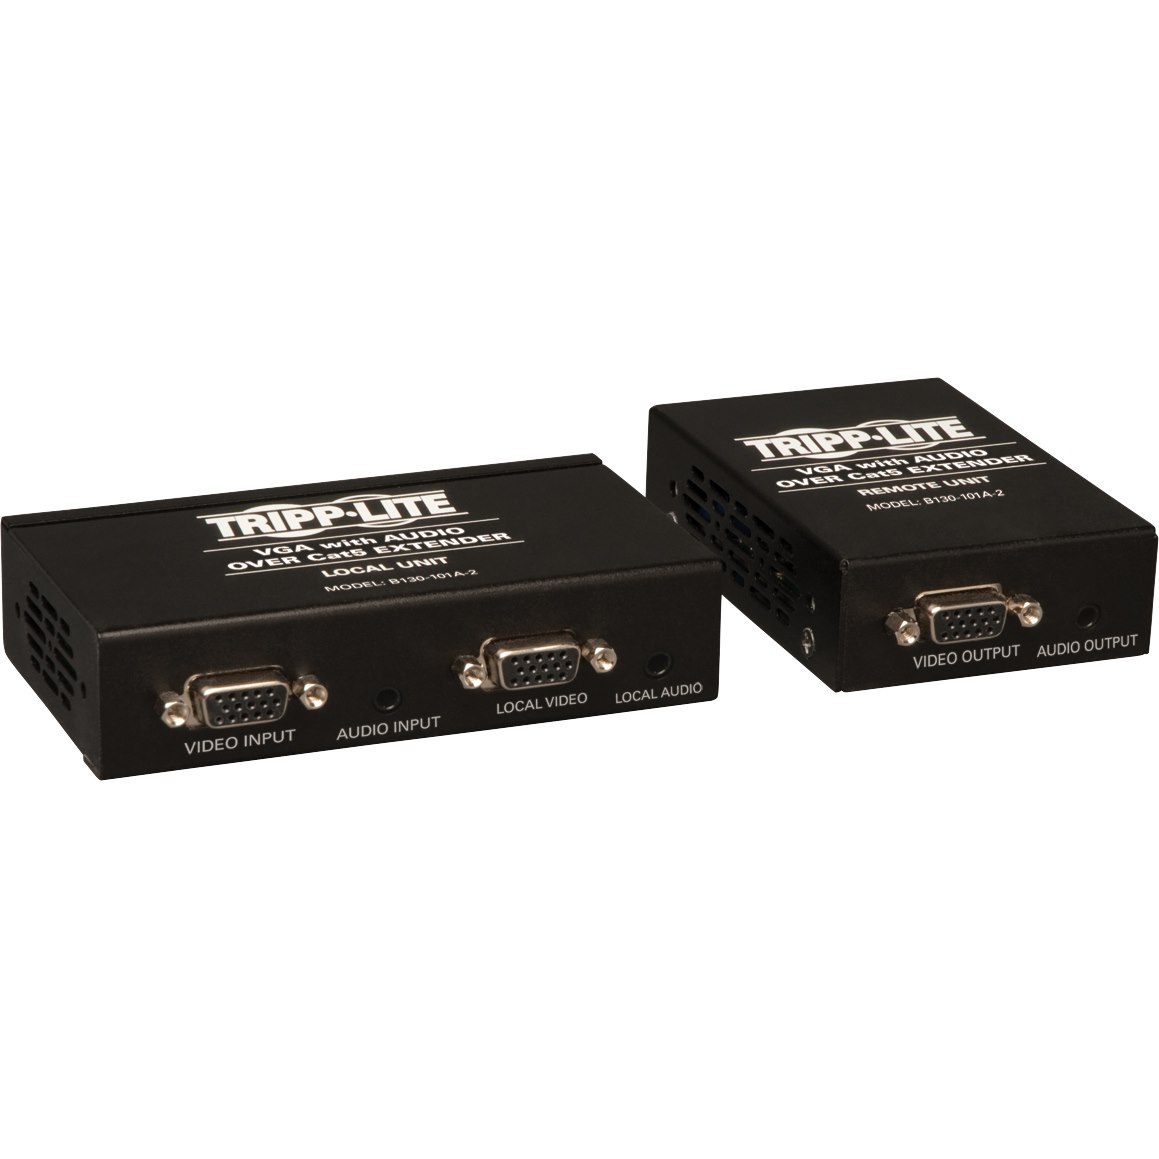 Tripp Lite by Eaton VGA over Cat5/6 Extender Kit, Box-Style Transmitter/Receiver for Video/Audio, Up to 1000 ft. (305 m), TAA